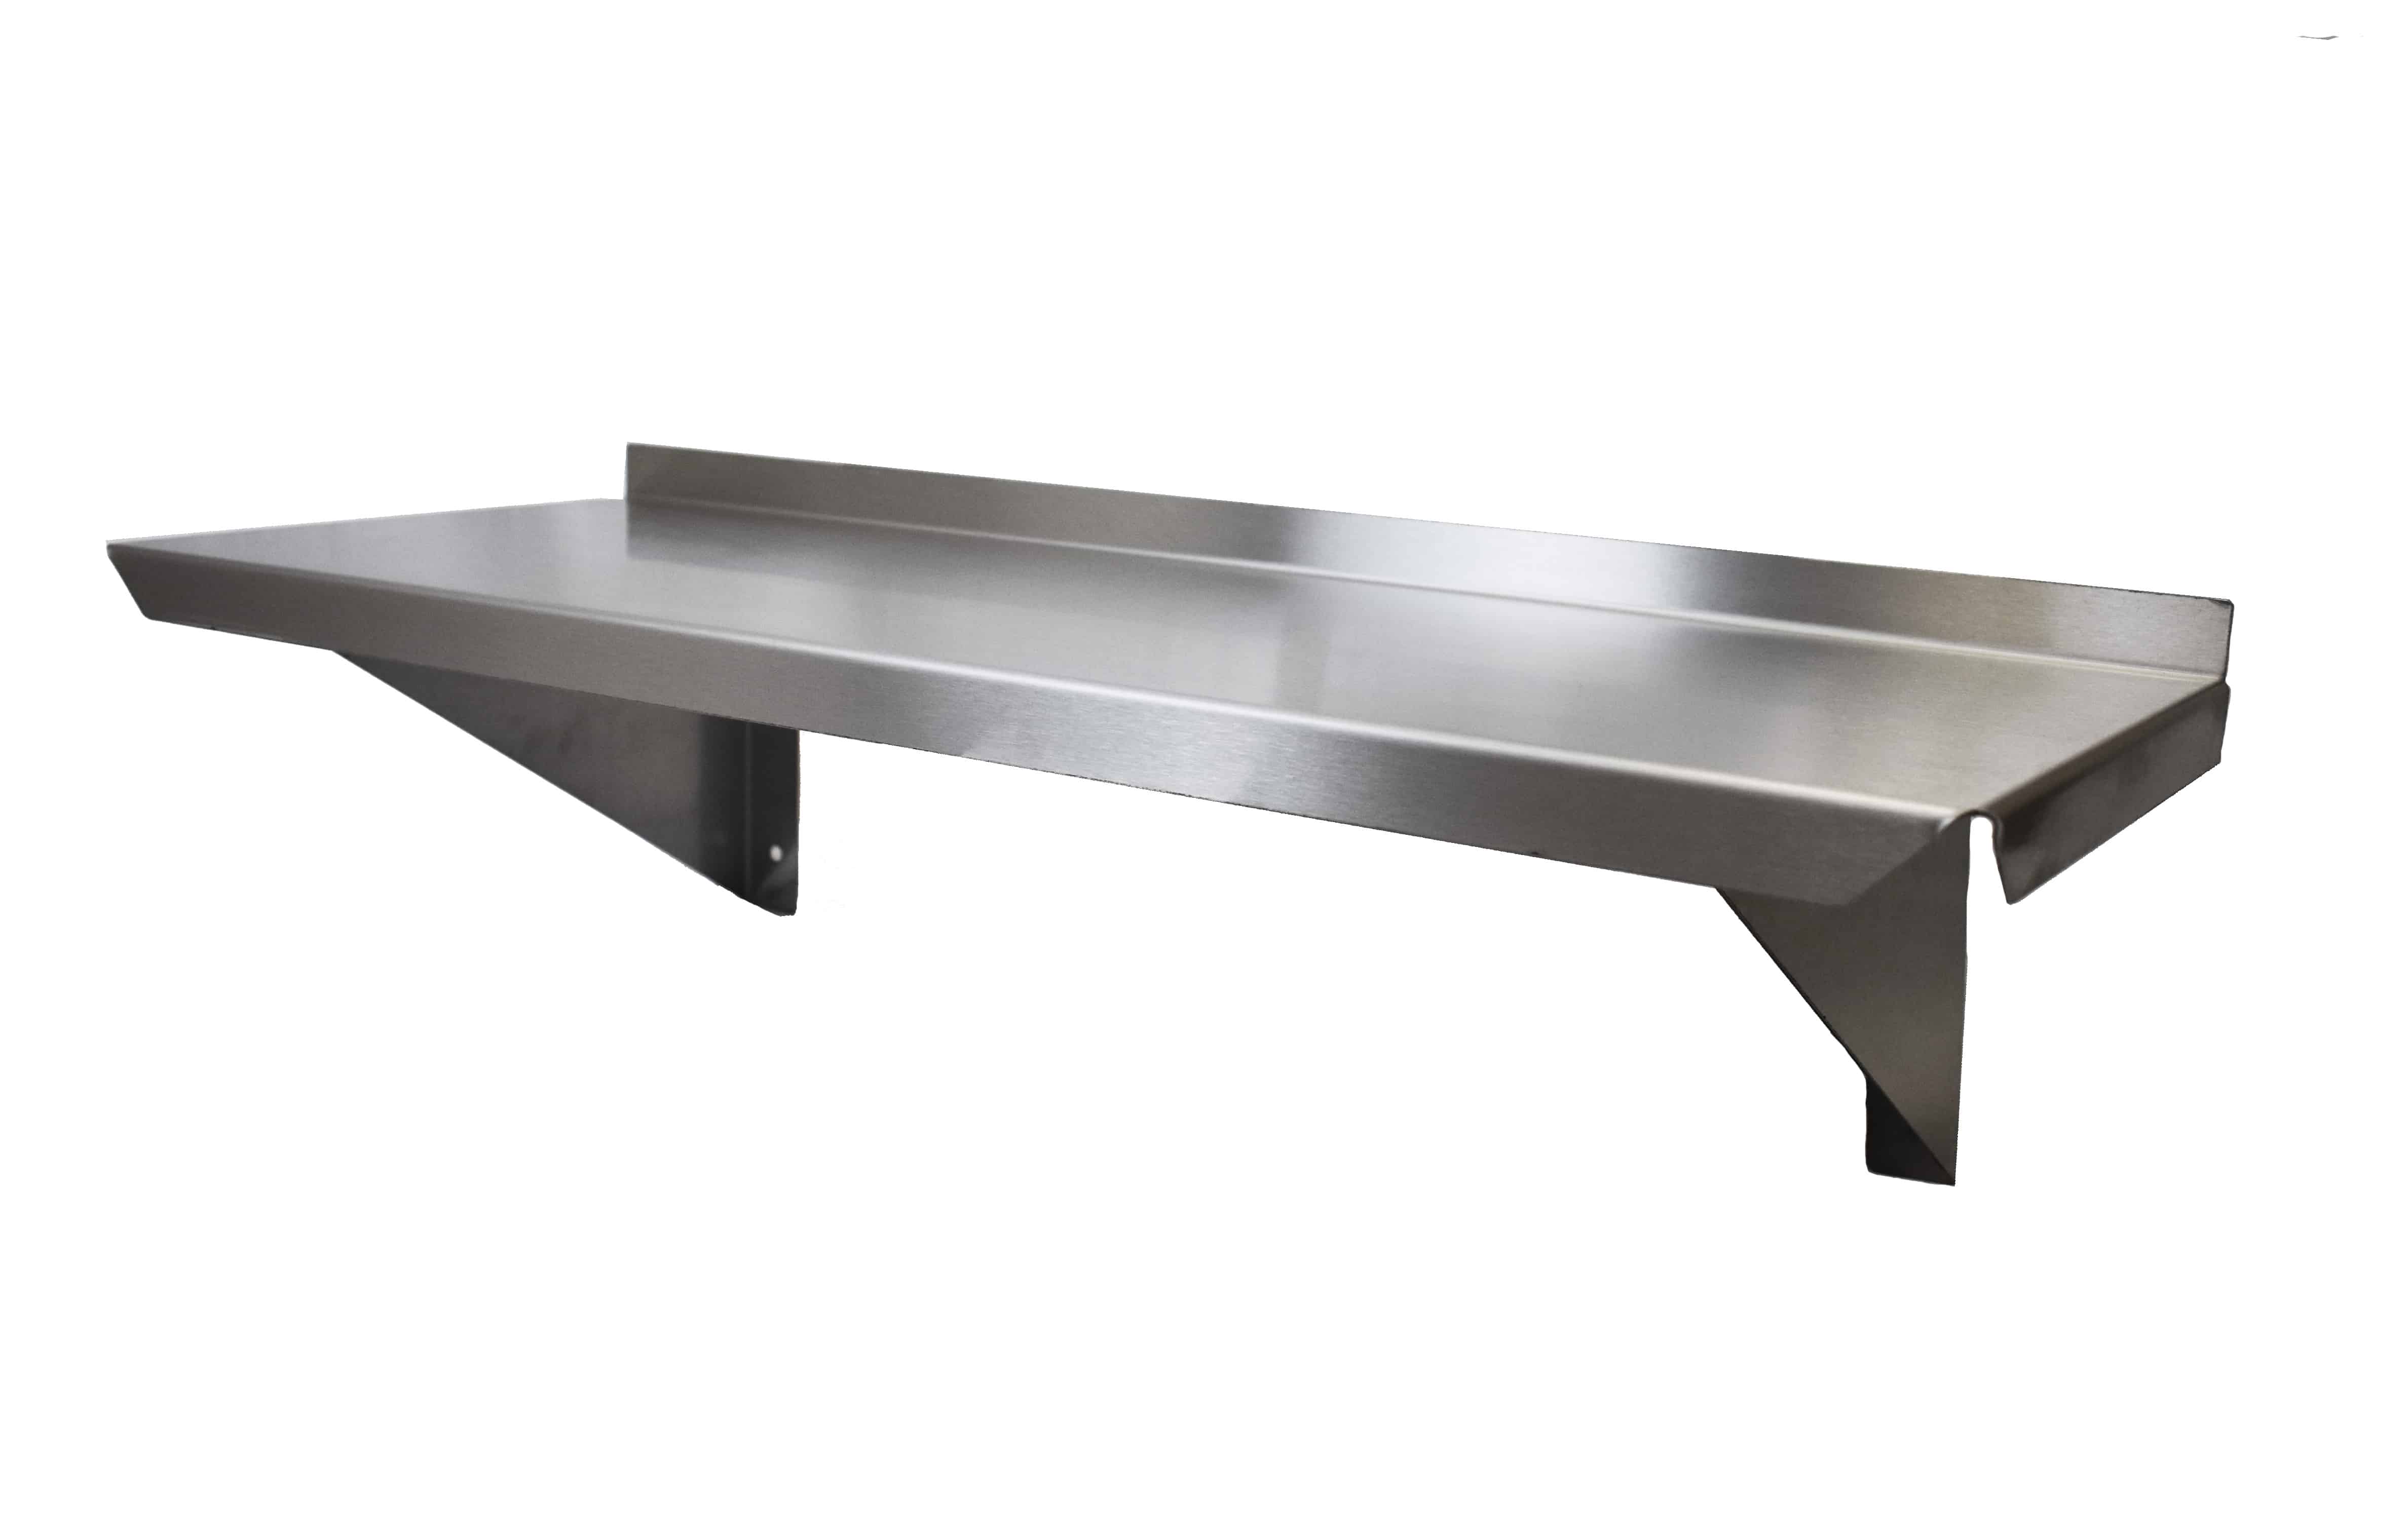 Stainless steel wall shelving